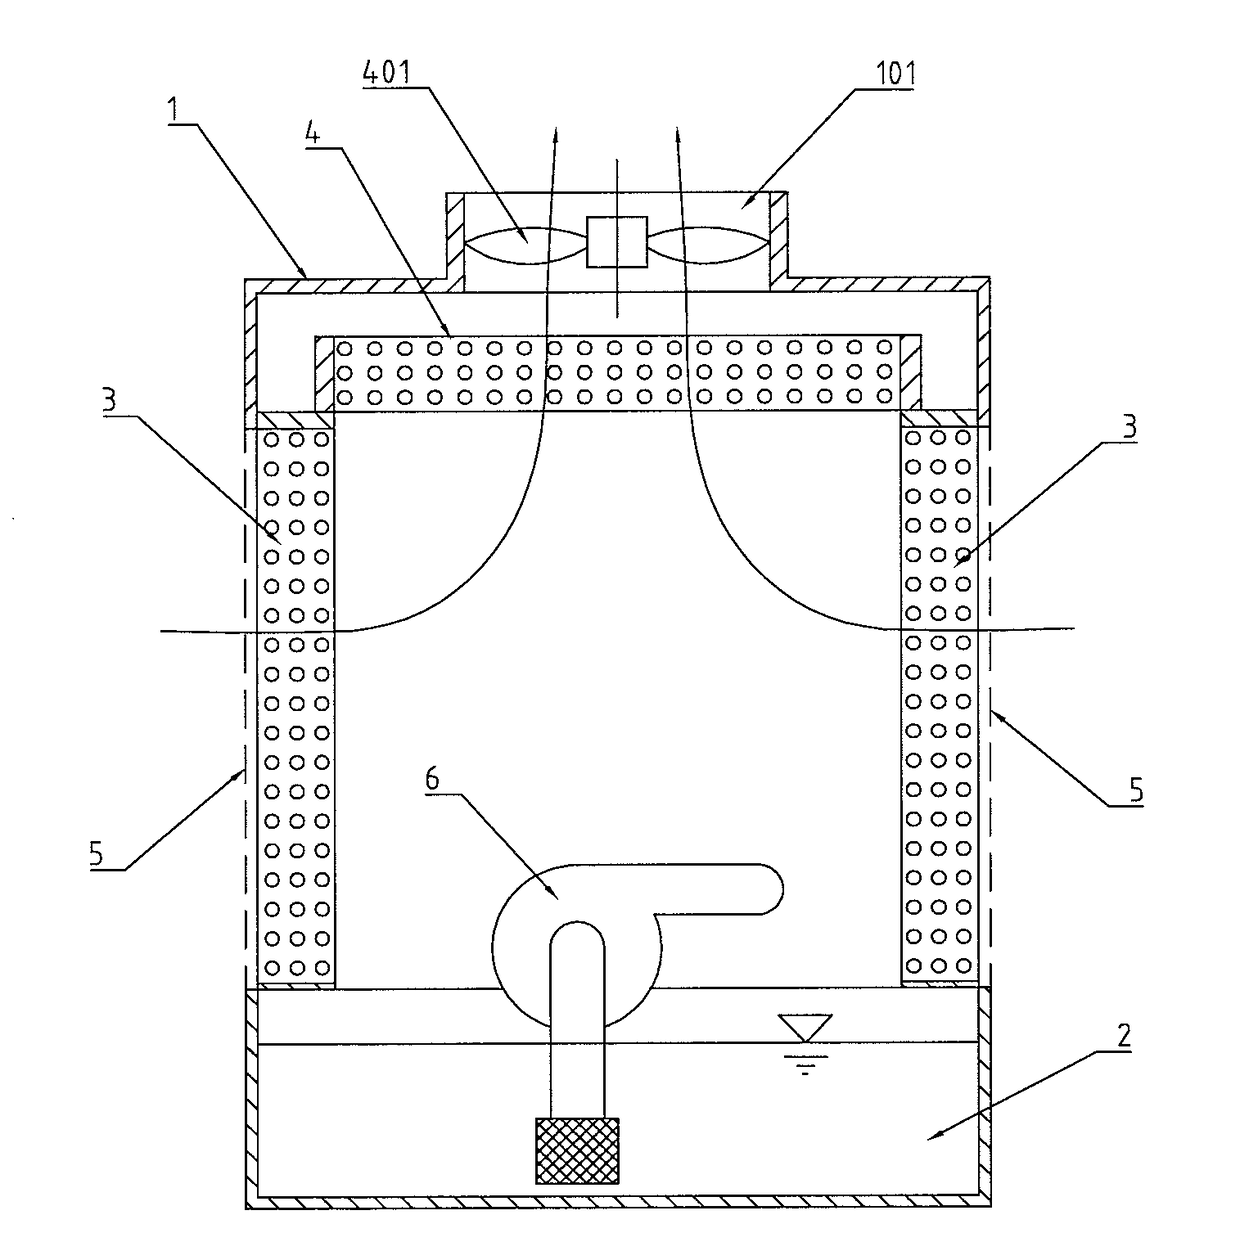 Air purification and condensation water-production system